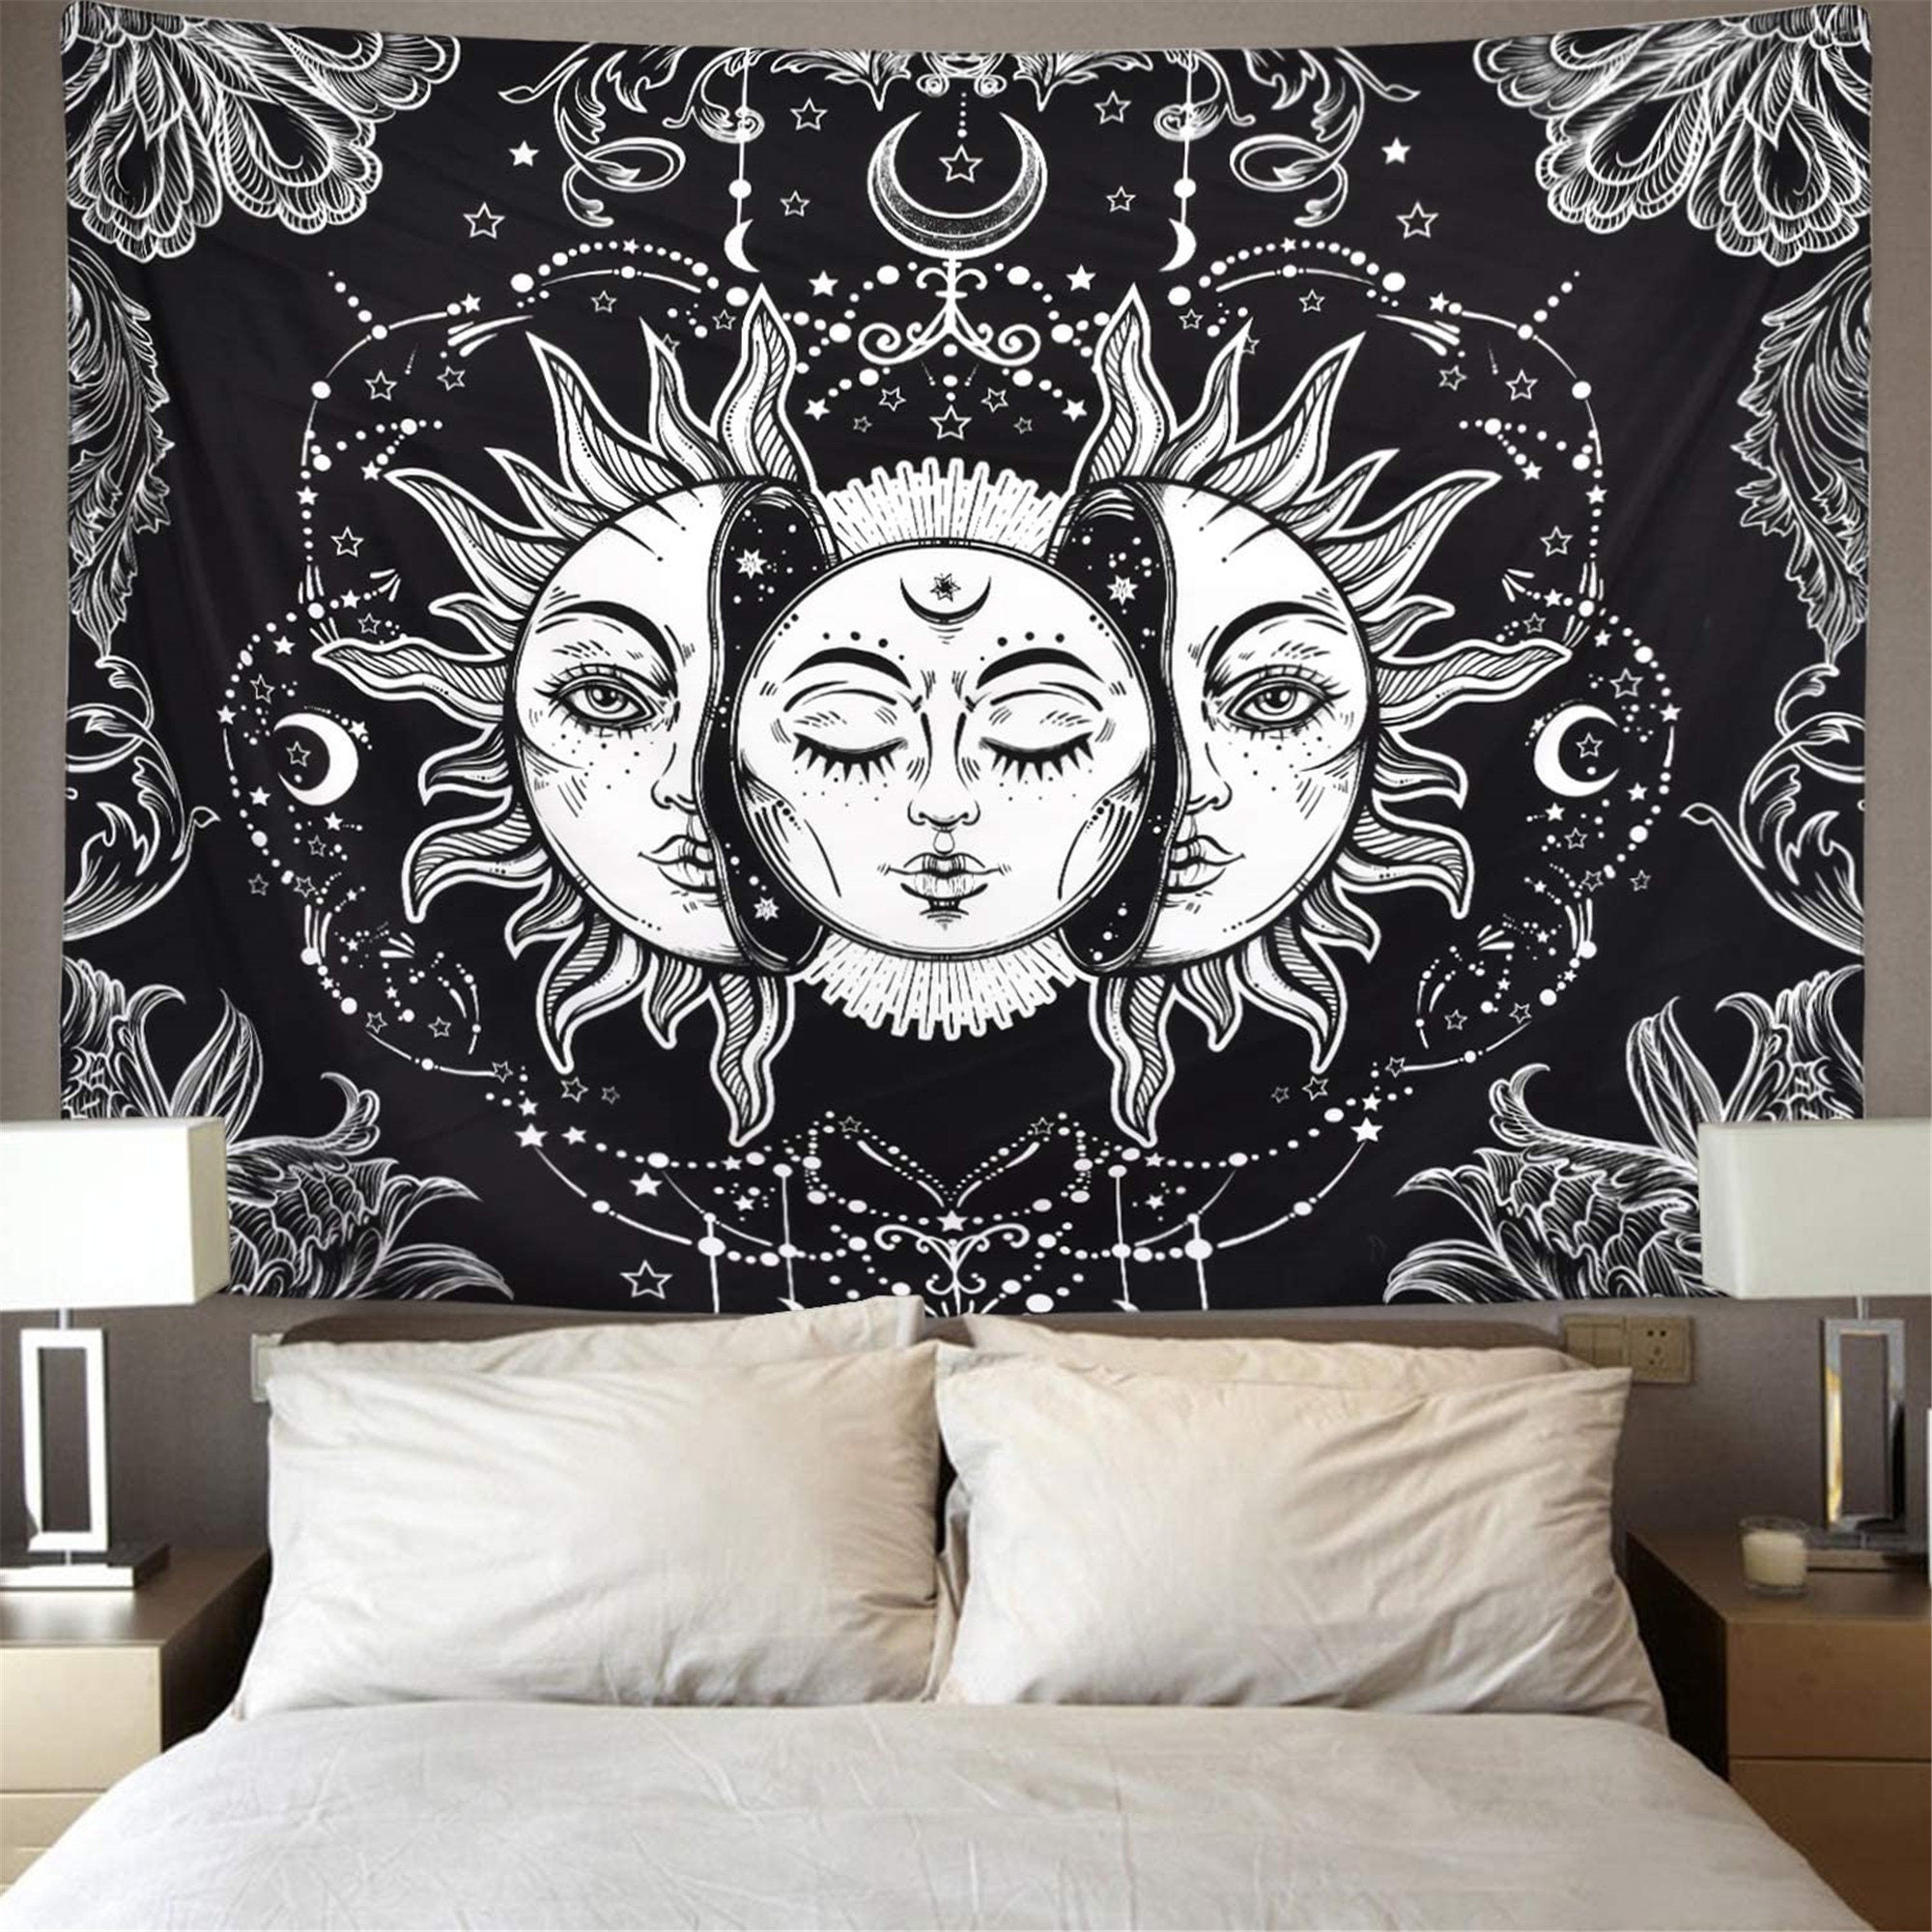 Discover Sun and Moon Tapestry Burning Sun with Star Tapestry Psychedelic Tapestry Black and White Mystic Tapestry Wall Hanging